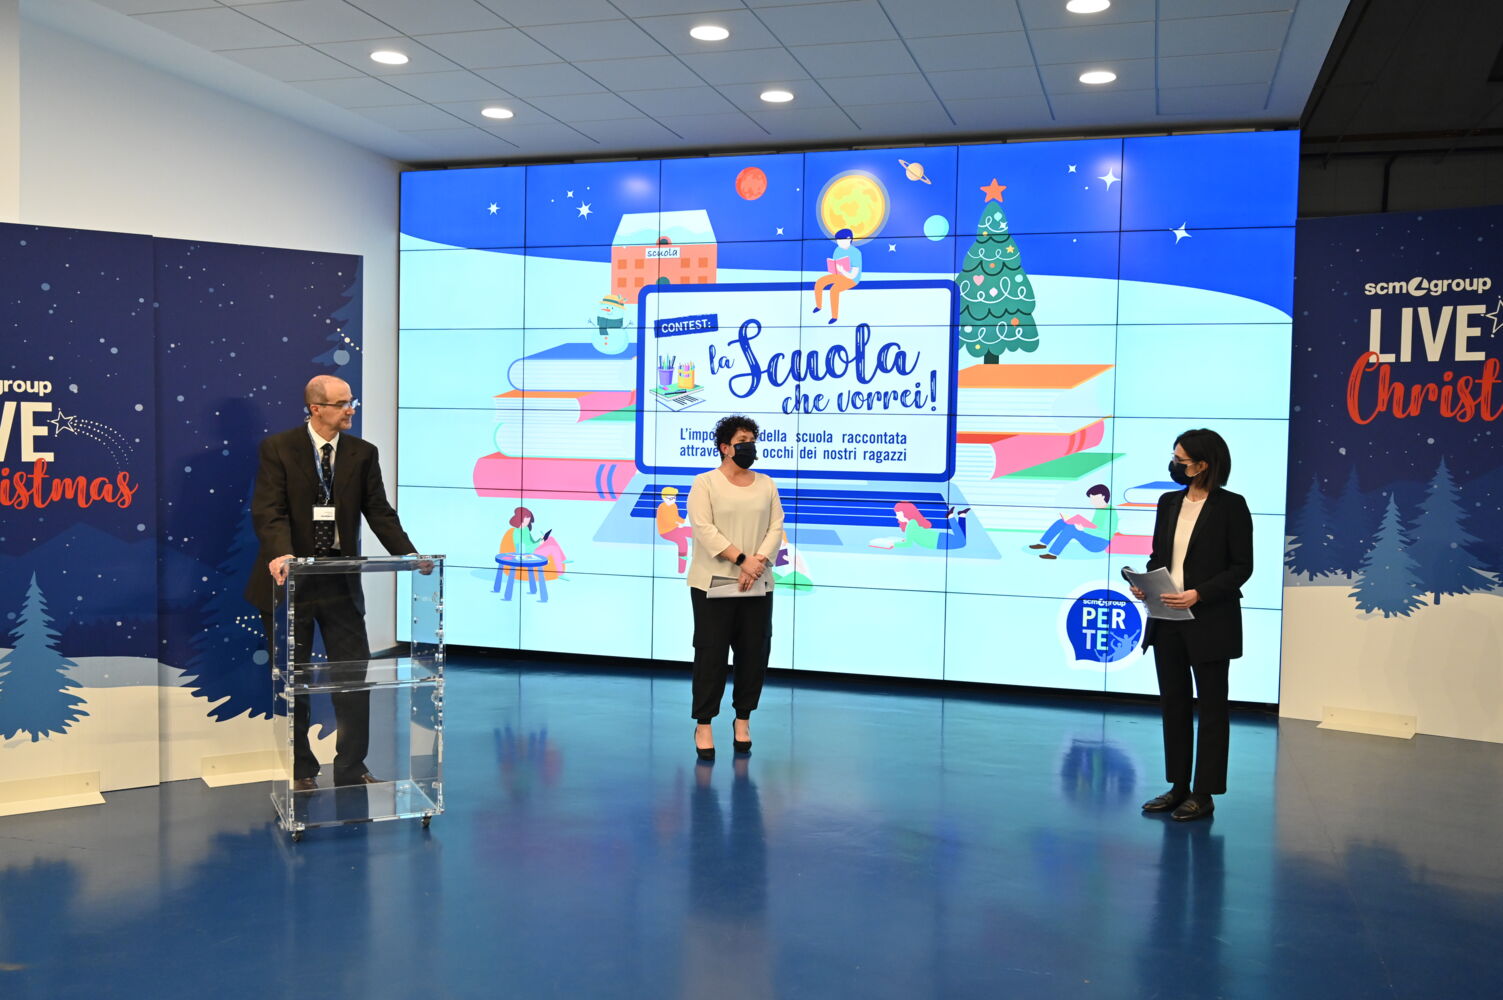 Scm Group Live Christmas: lots of new features for the pre-Christmas event at the Italian plants